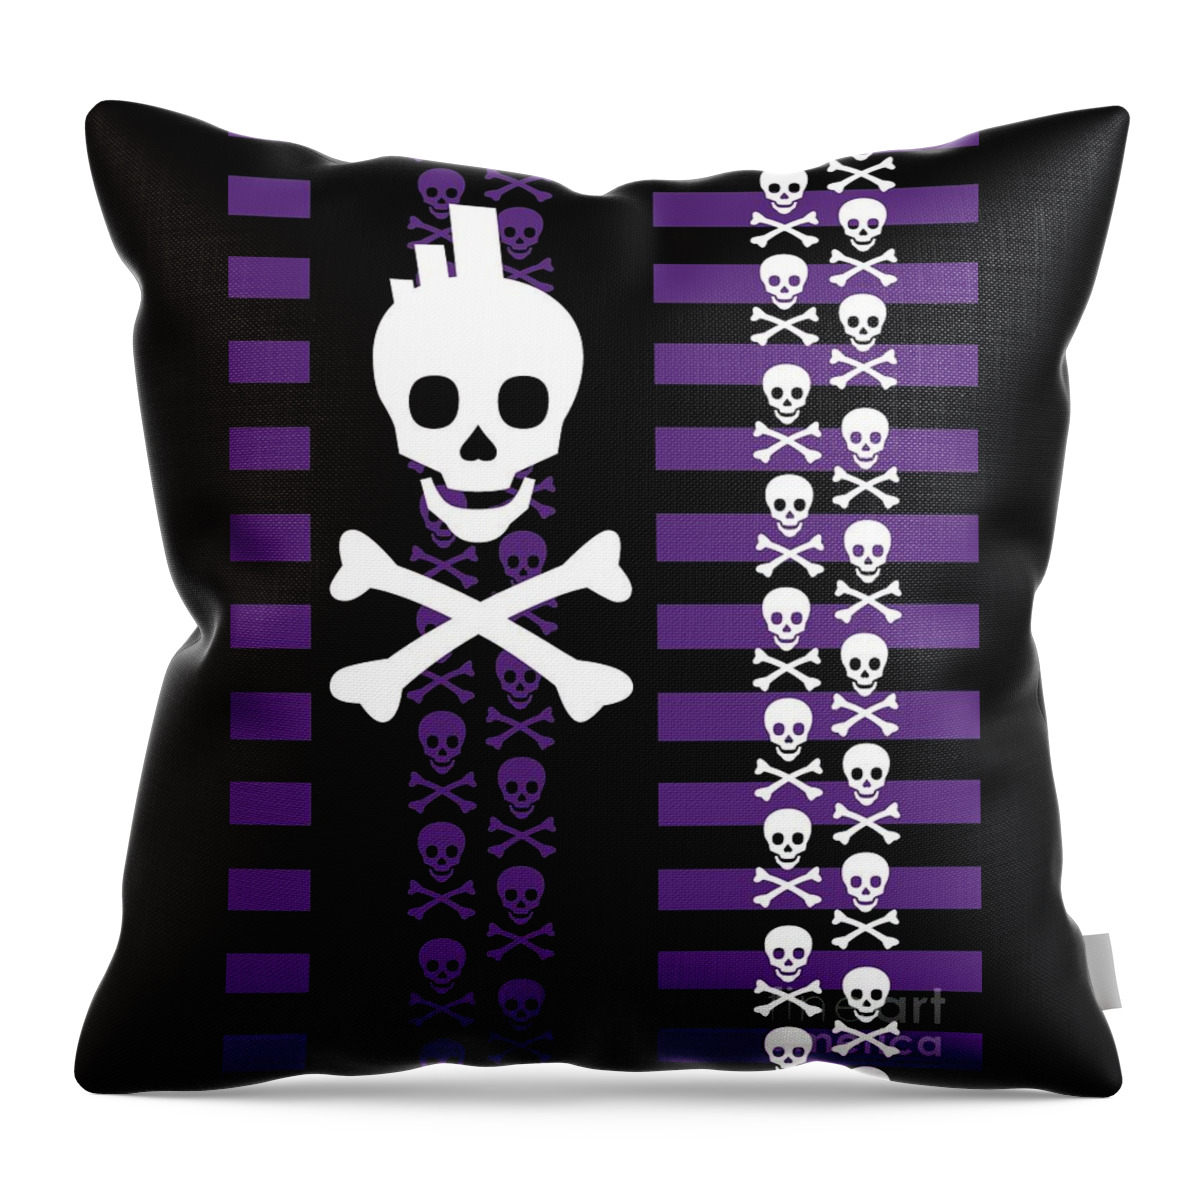 Razor Blades Inside Emo Punk Goth Halloween Costume Throw Pillow for Sale  by GrandeDuc